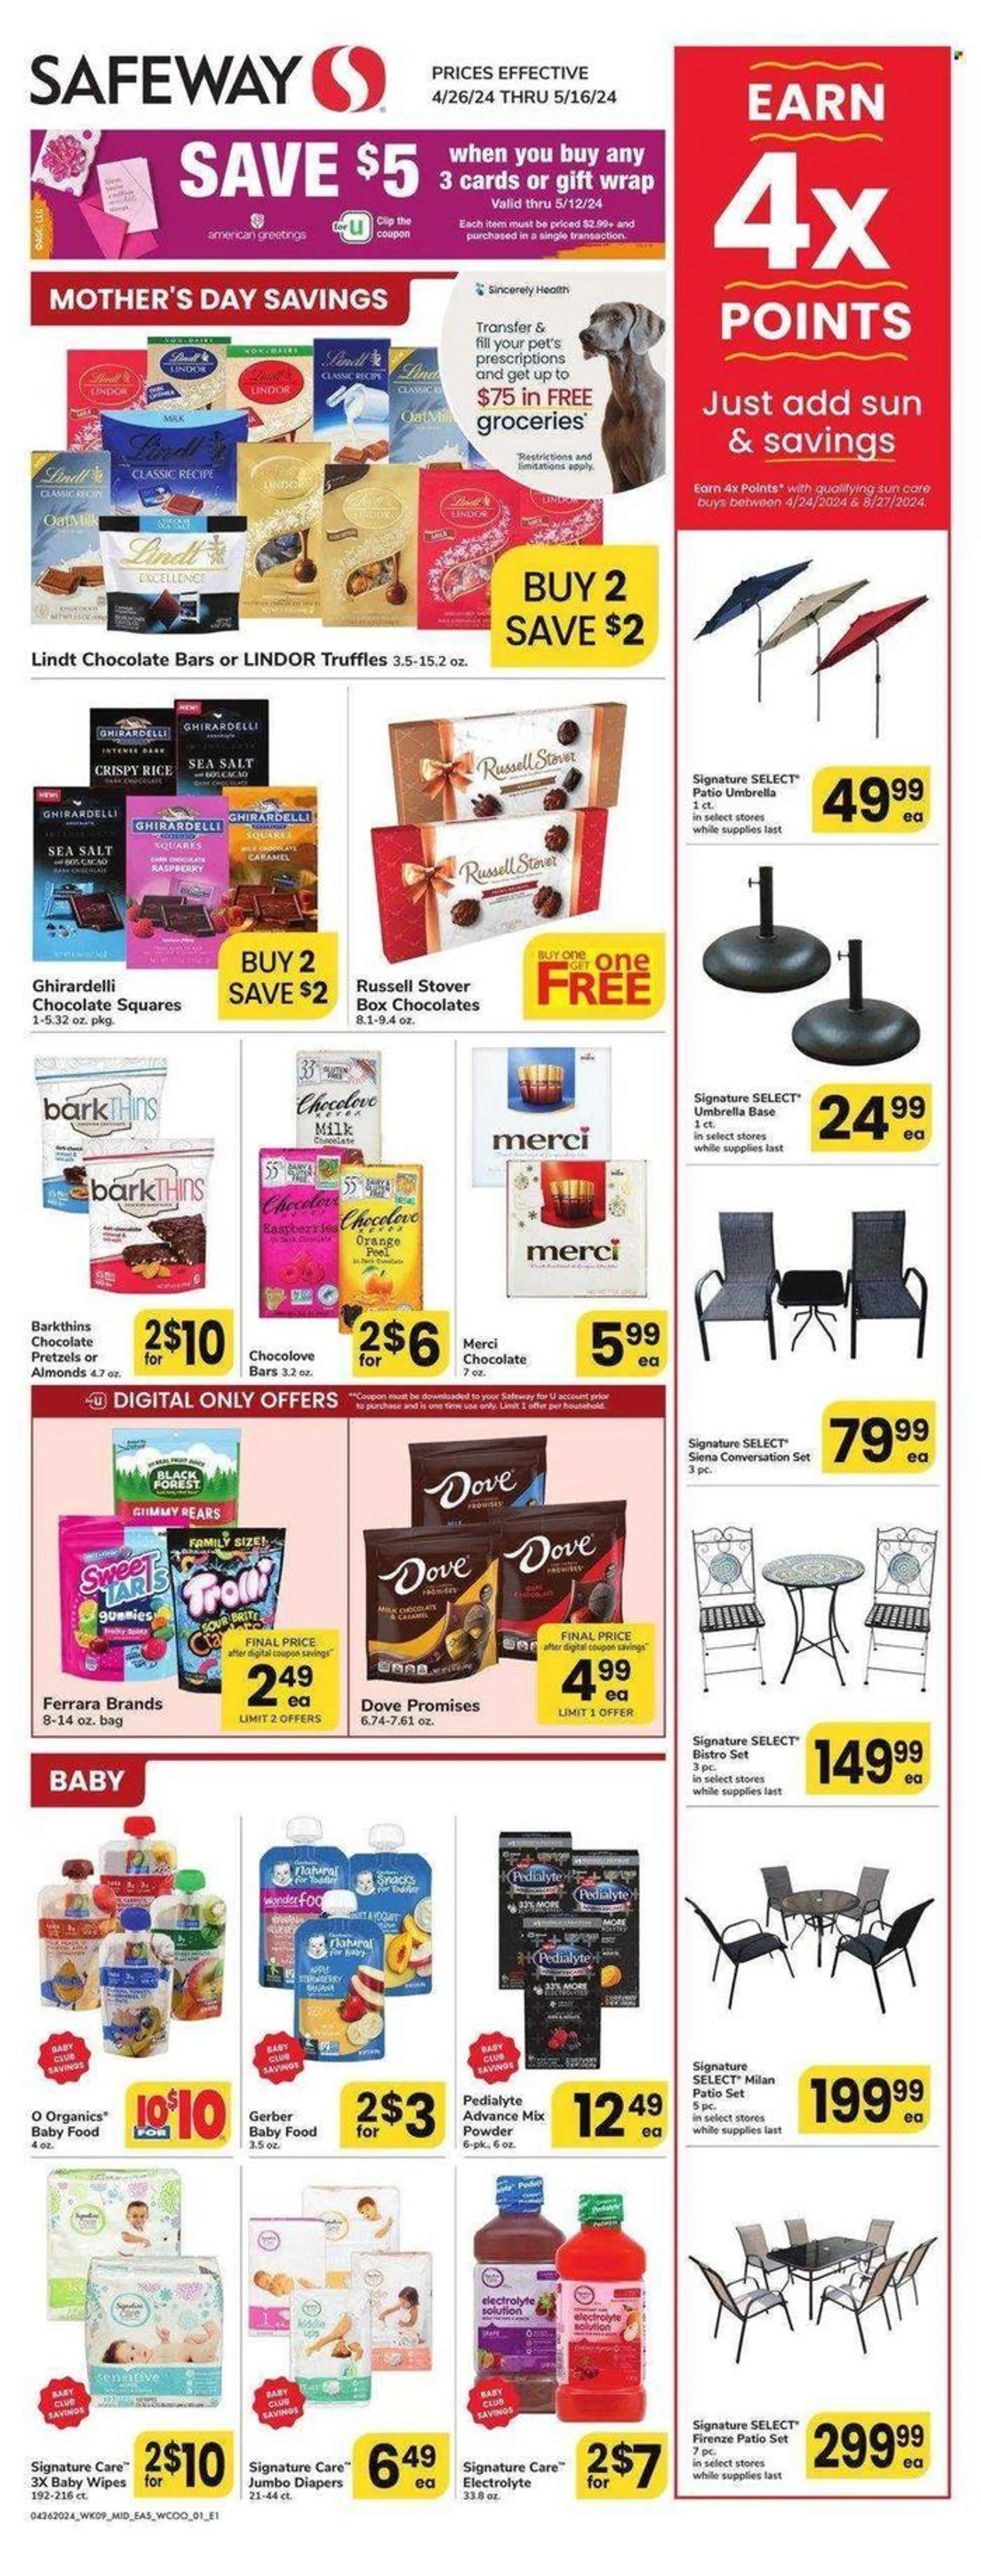 Mothers Day Savings - 1